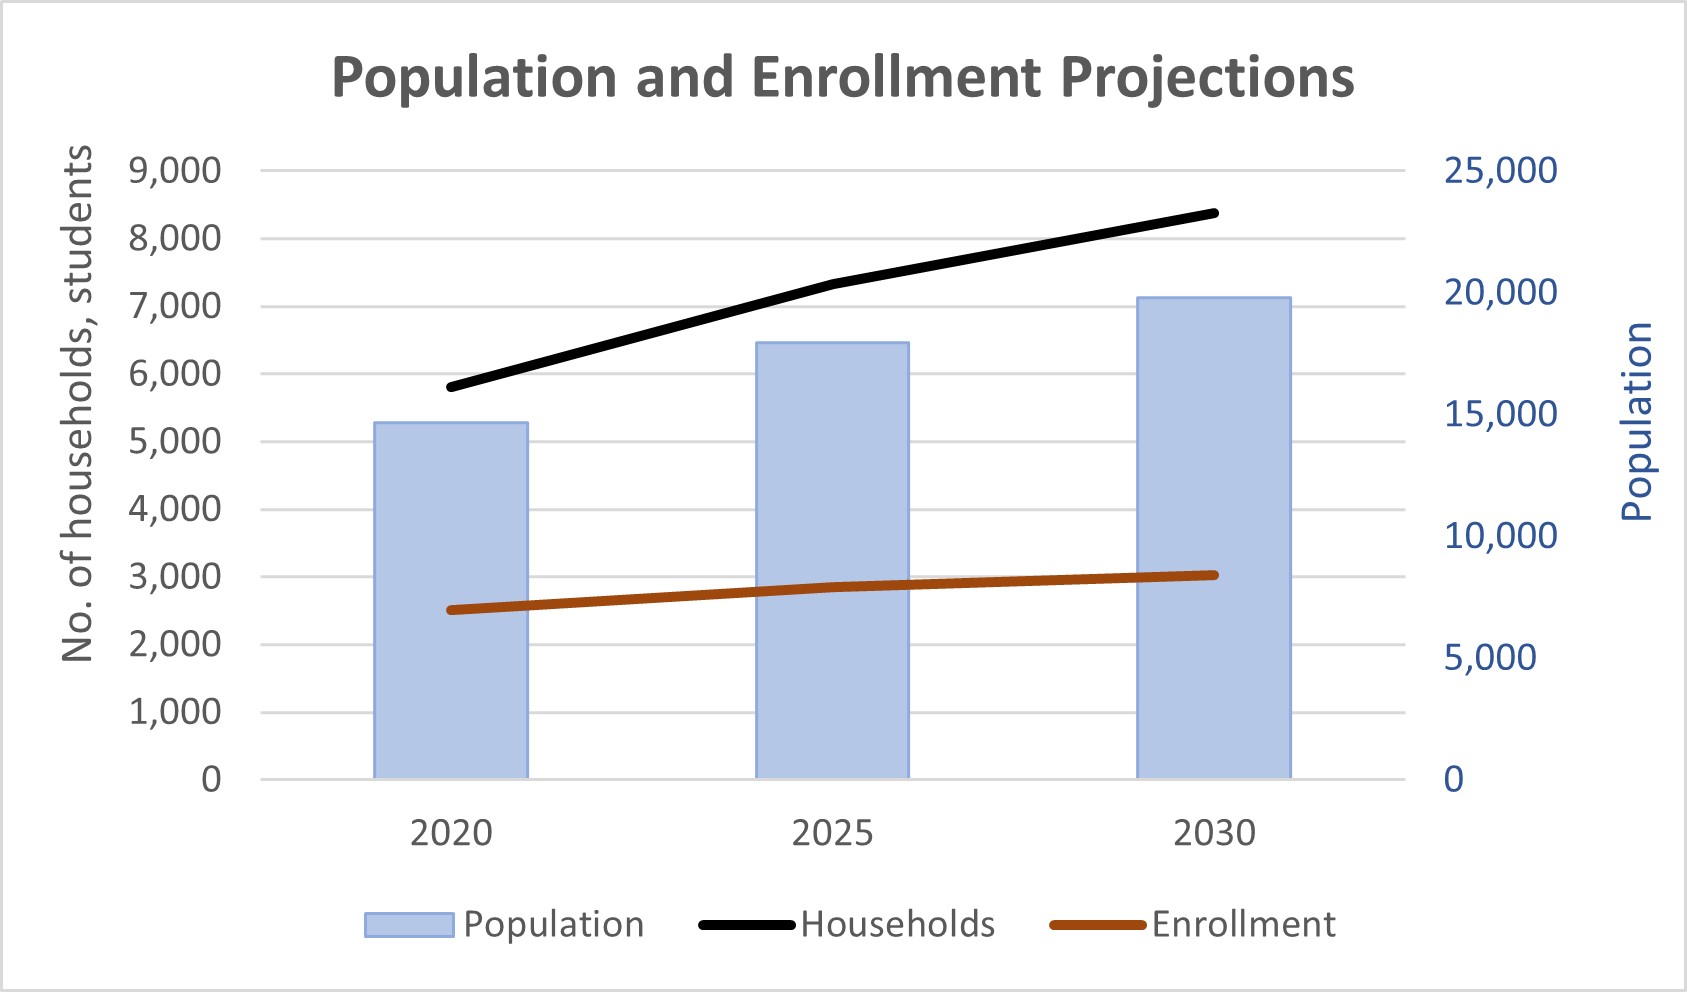 Population and enrollment projections for Falls Church 2020-2030